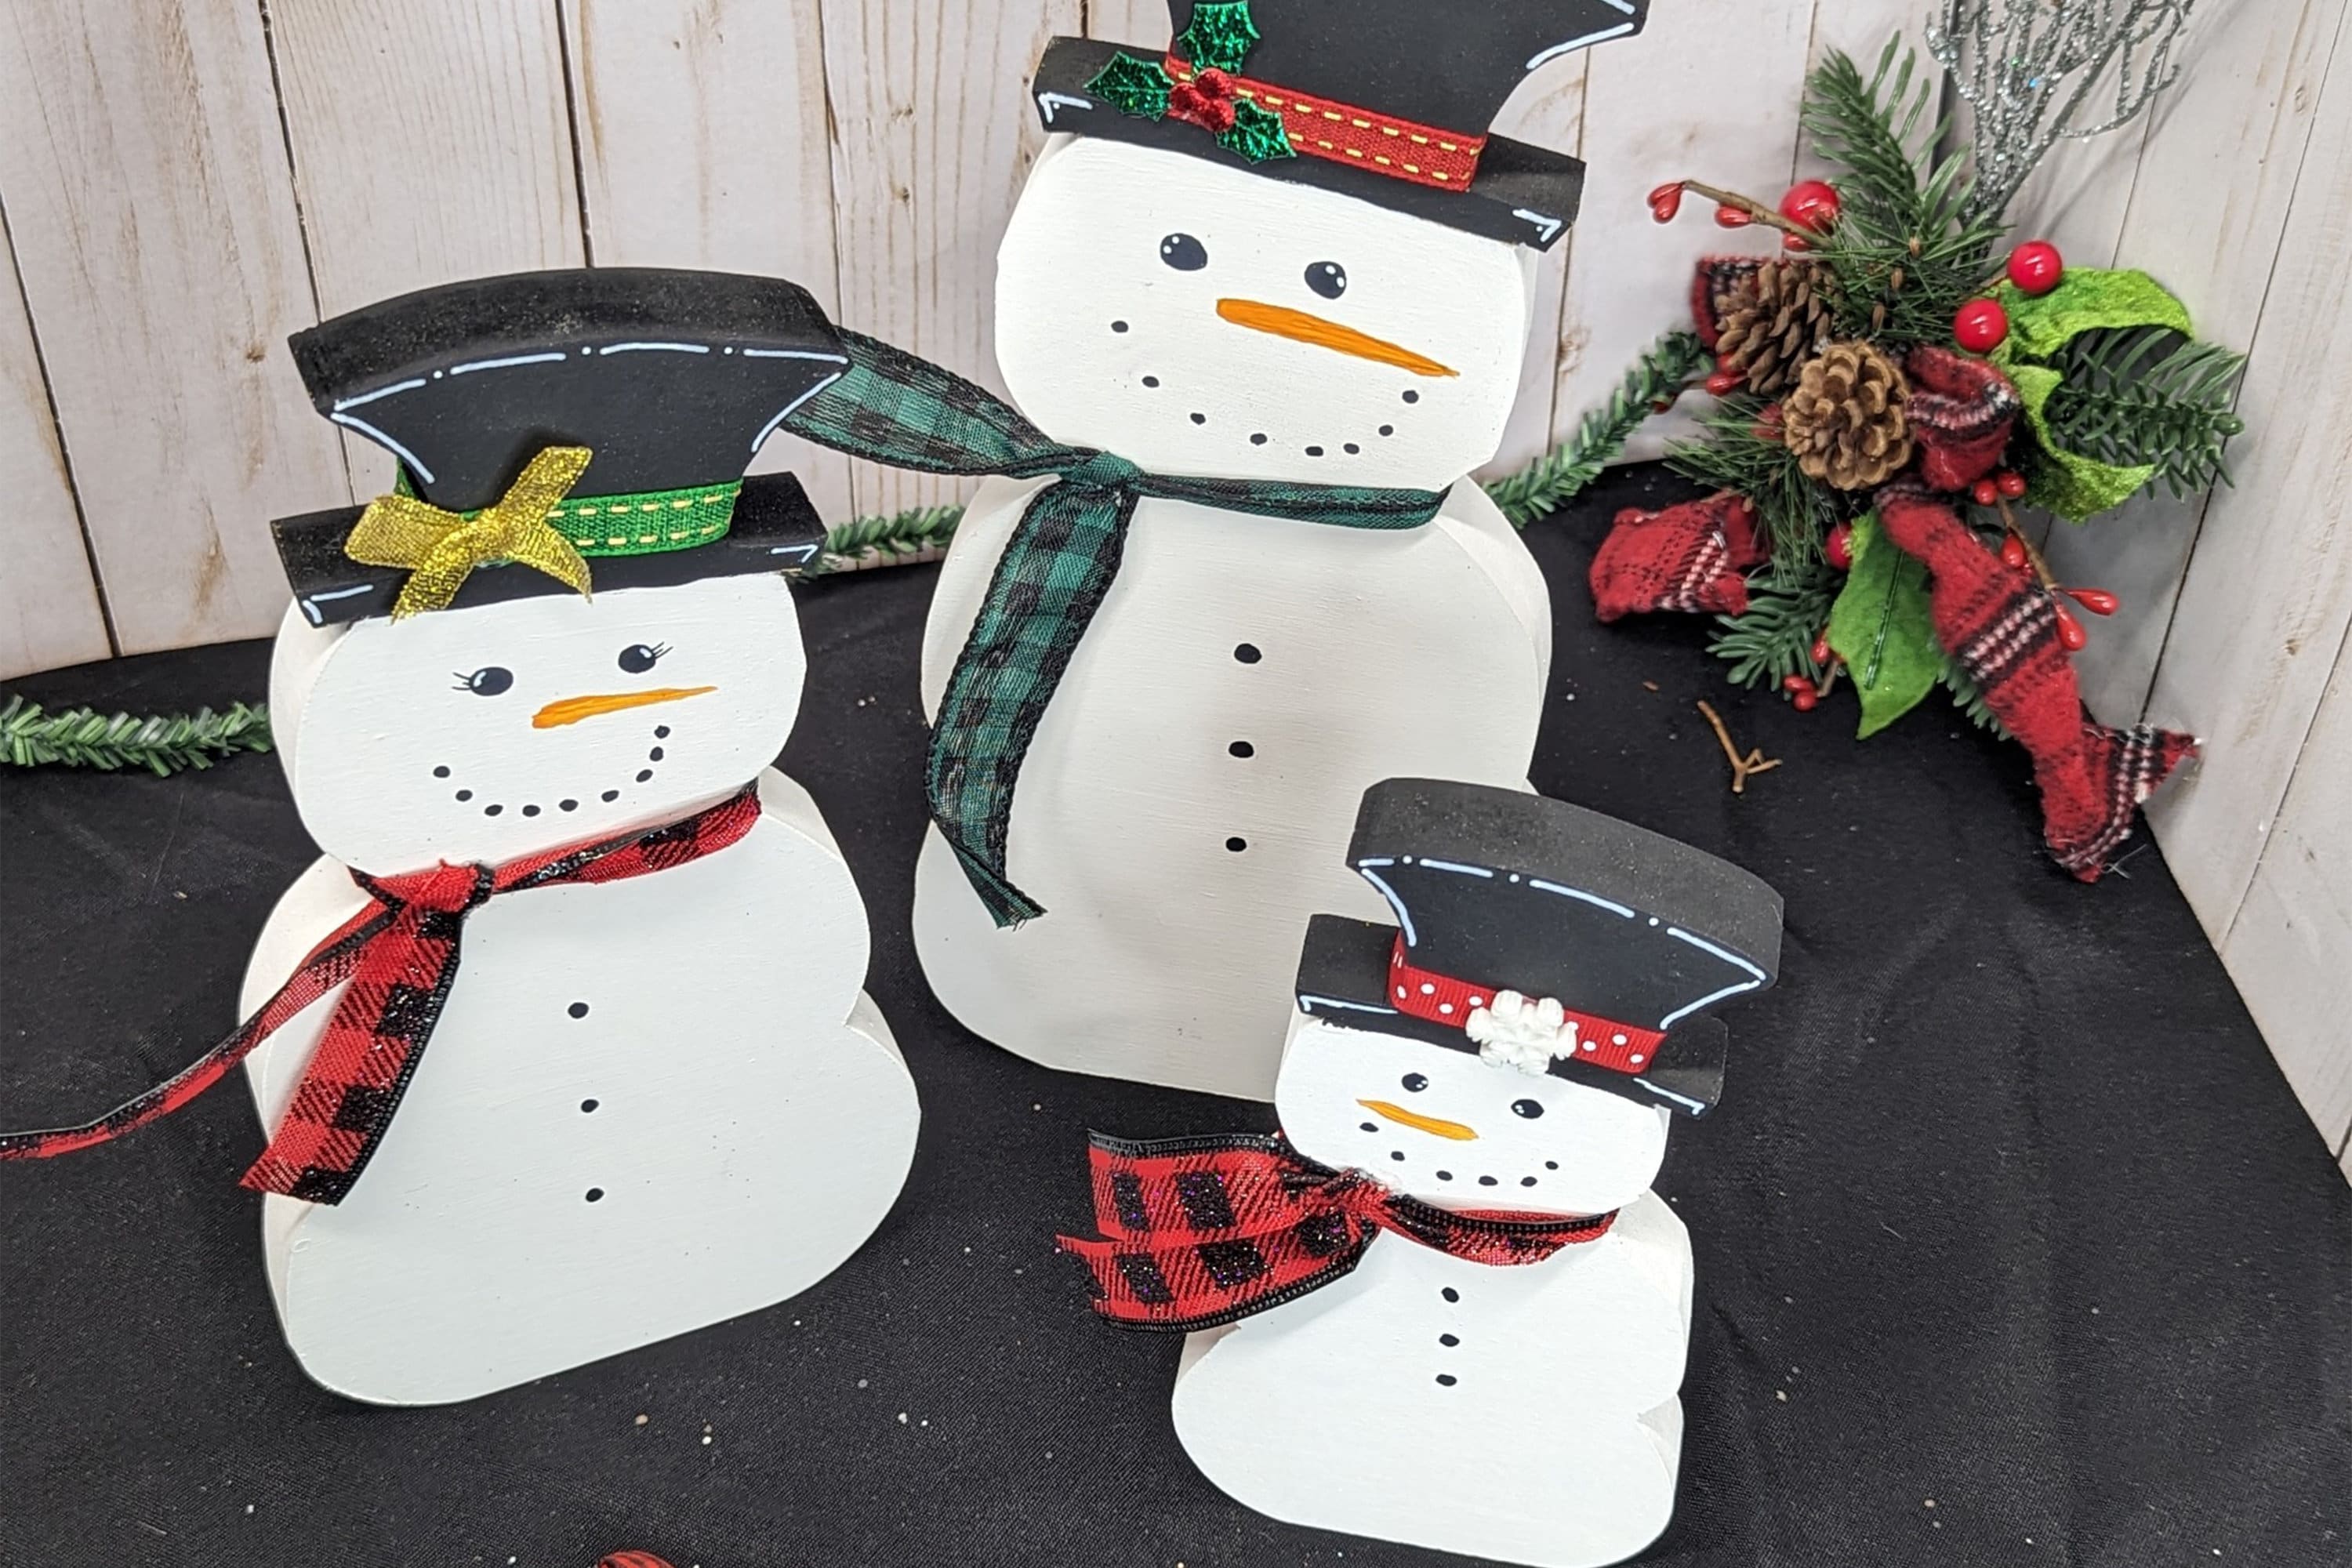 Standing Snowman Decor with scarf &top hat table/ shelf sitter 7